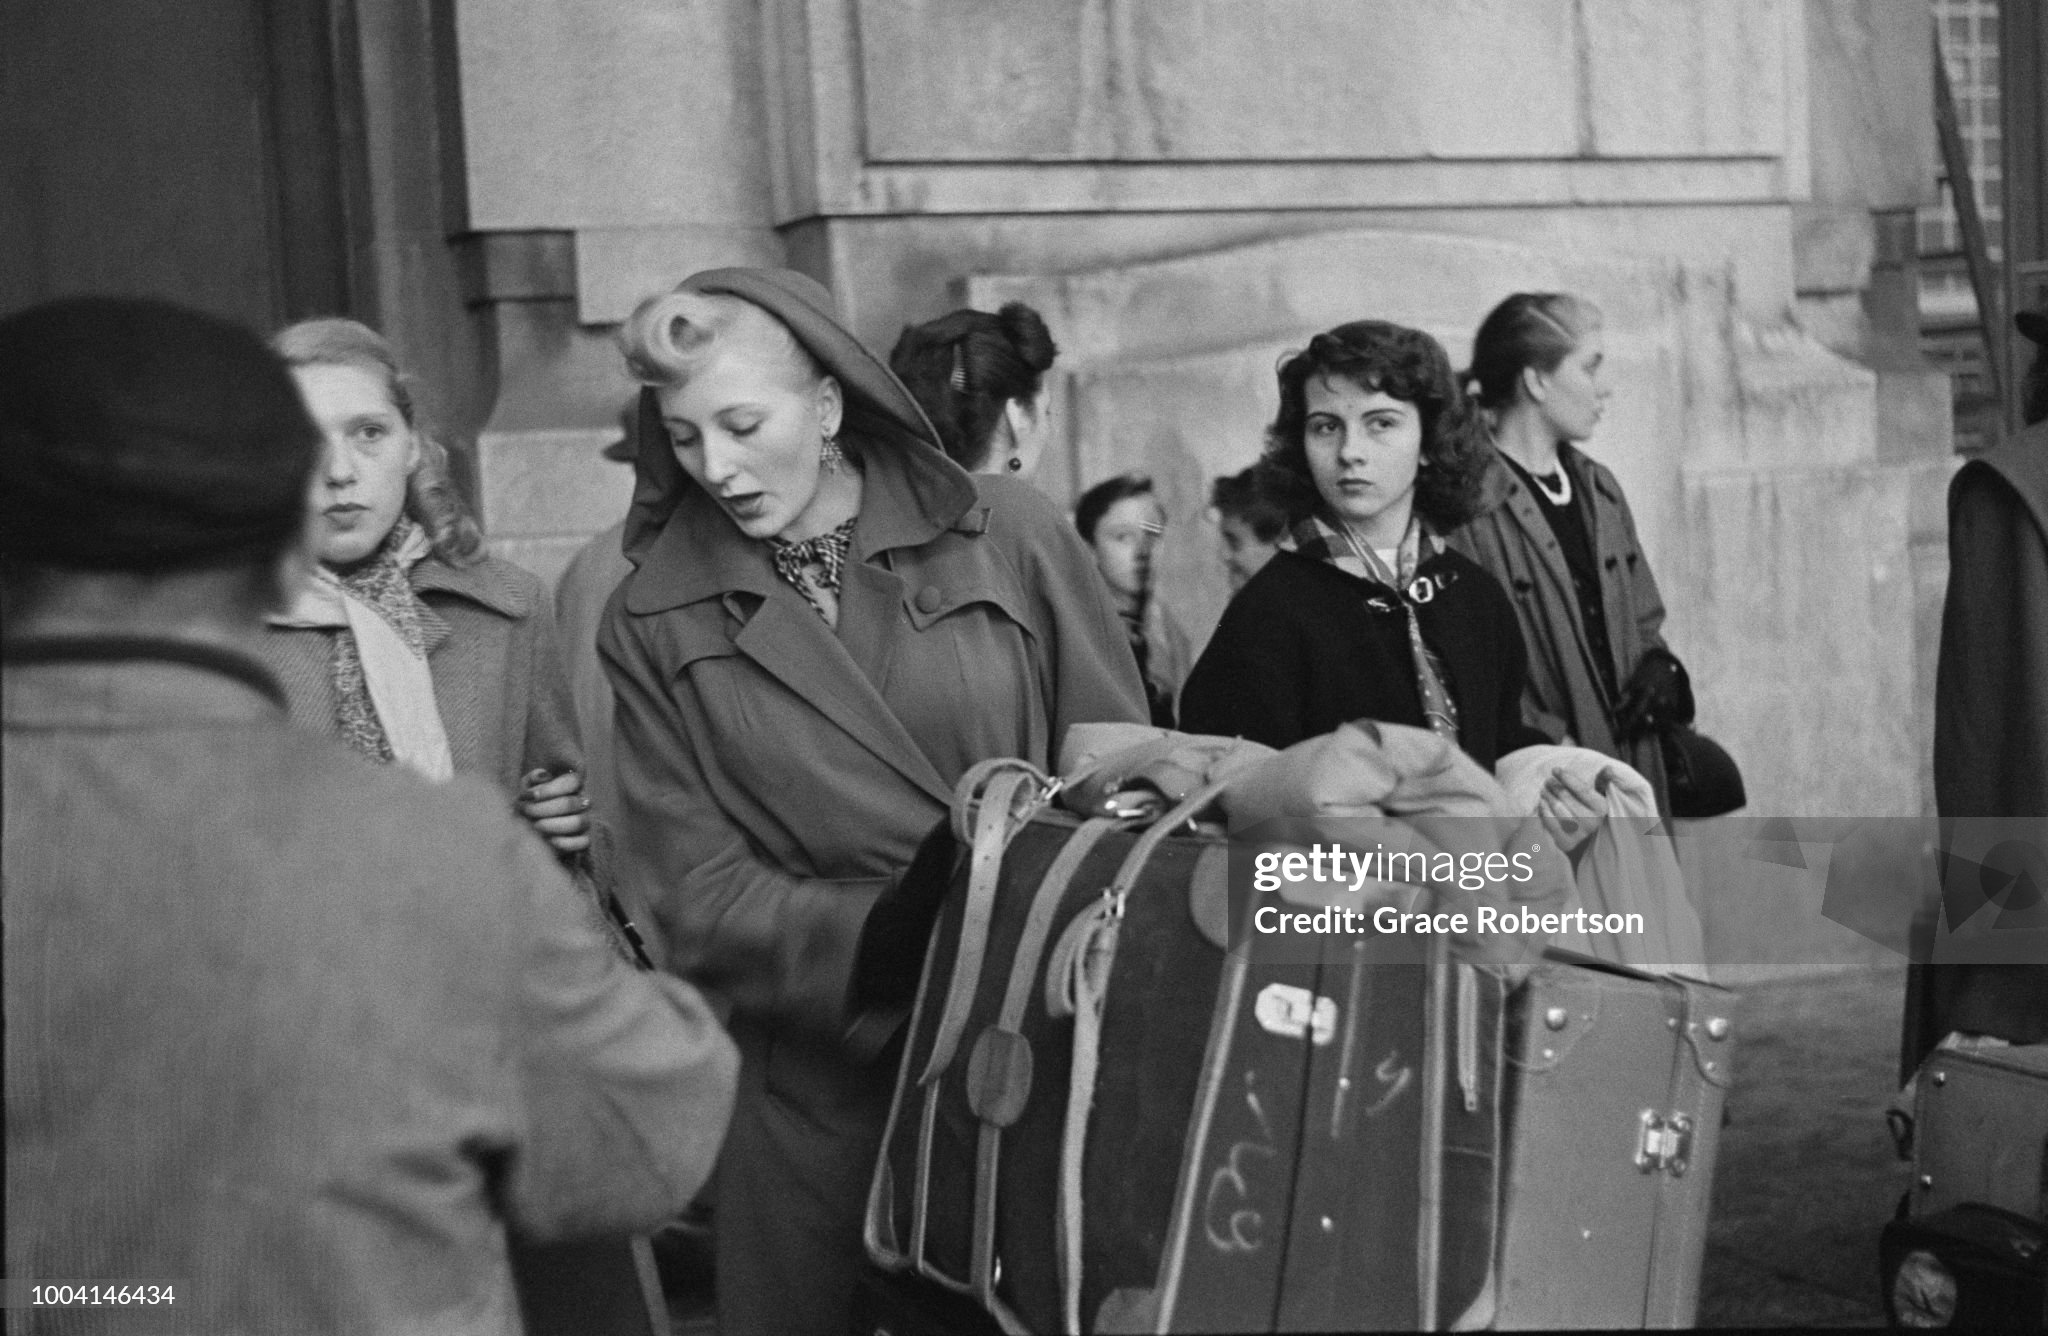 Members of a newly-formed Bluebell Girls dance troupe from England, arrive at a railway station in Milan, where they have their first engagement, November 1951. 